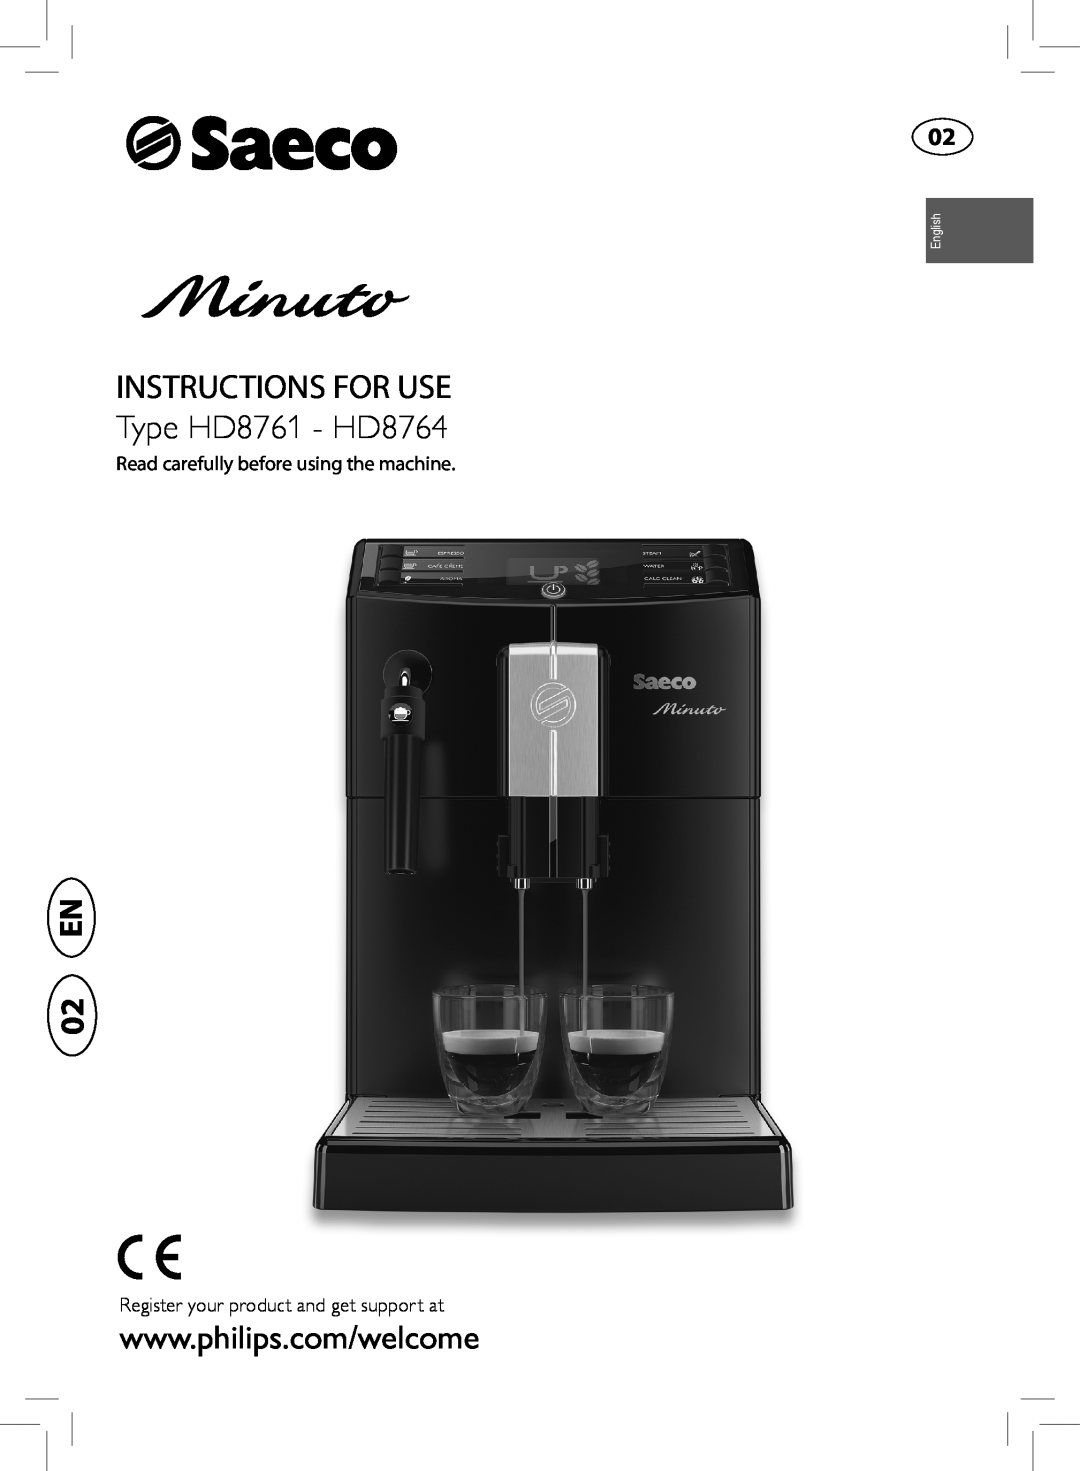 Saeco Coffee Makers manual 02 EN, INSTRUCTIONS FOR USE Type HD8761 - HD8764, English 